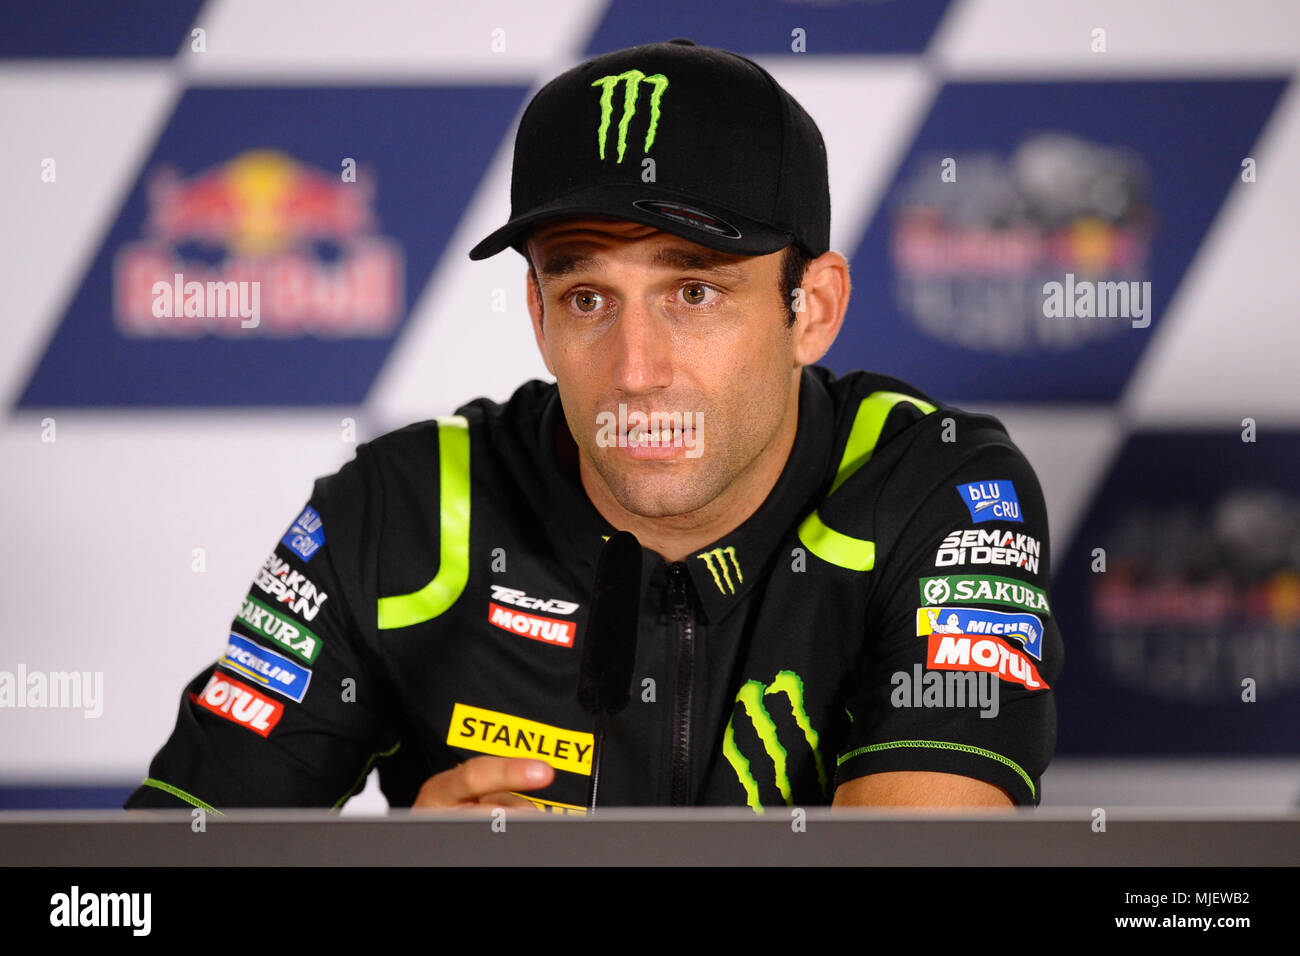 Page 2 - Johann Zarco High Resolution Stock Photography and Images - Alamy